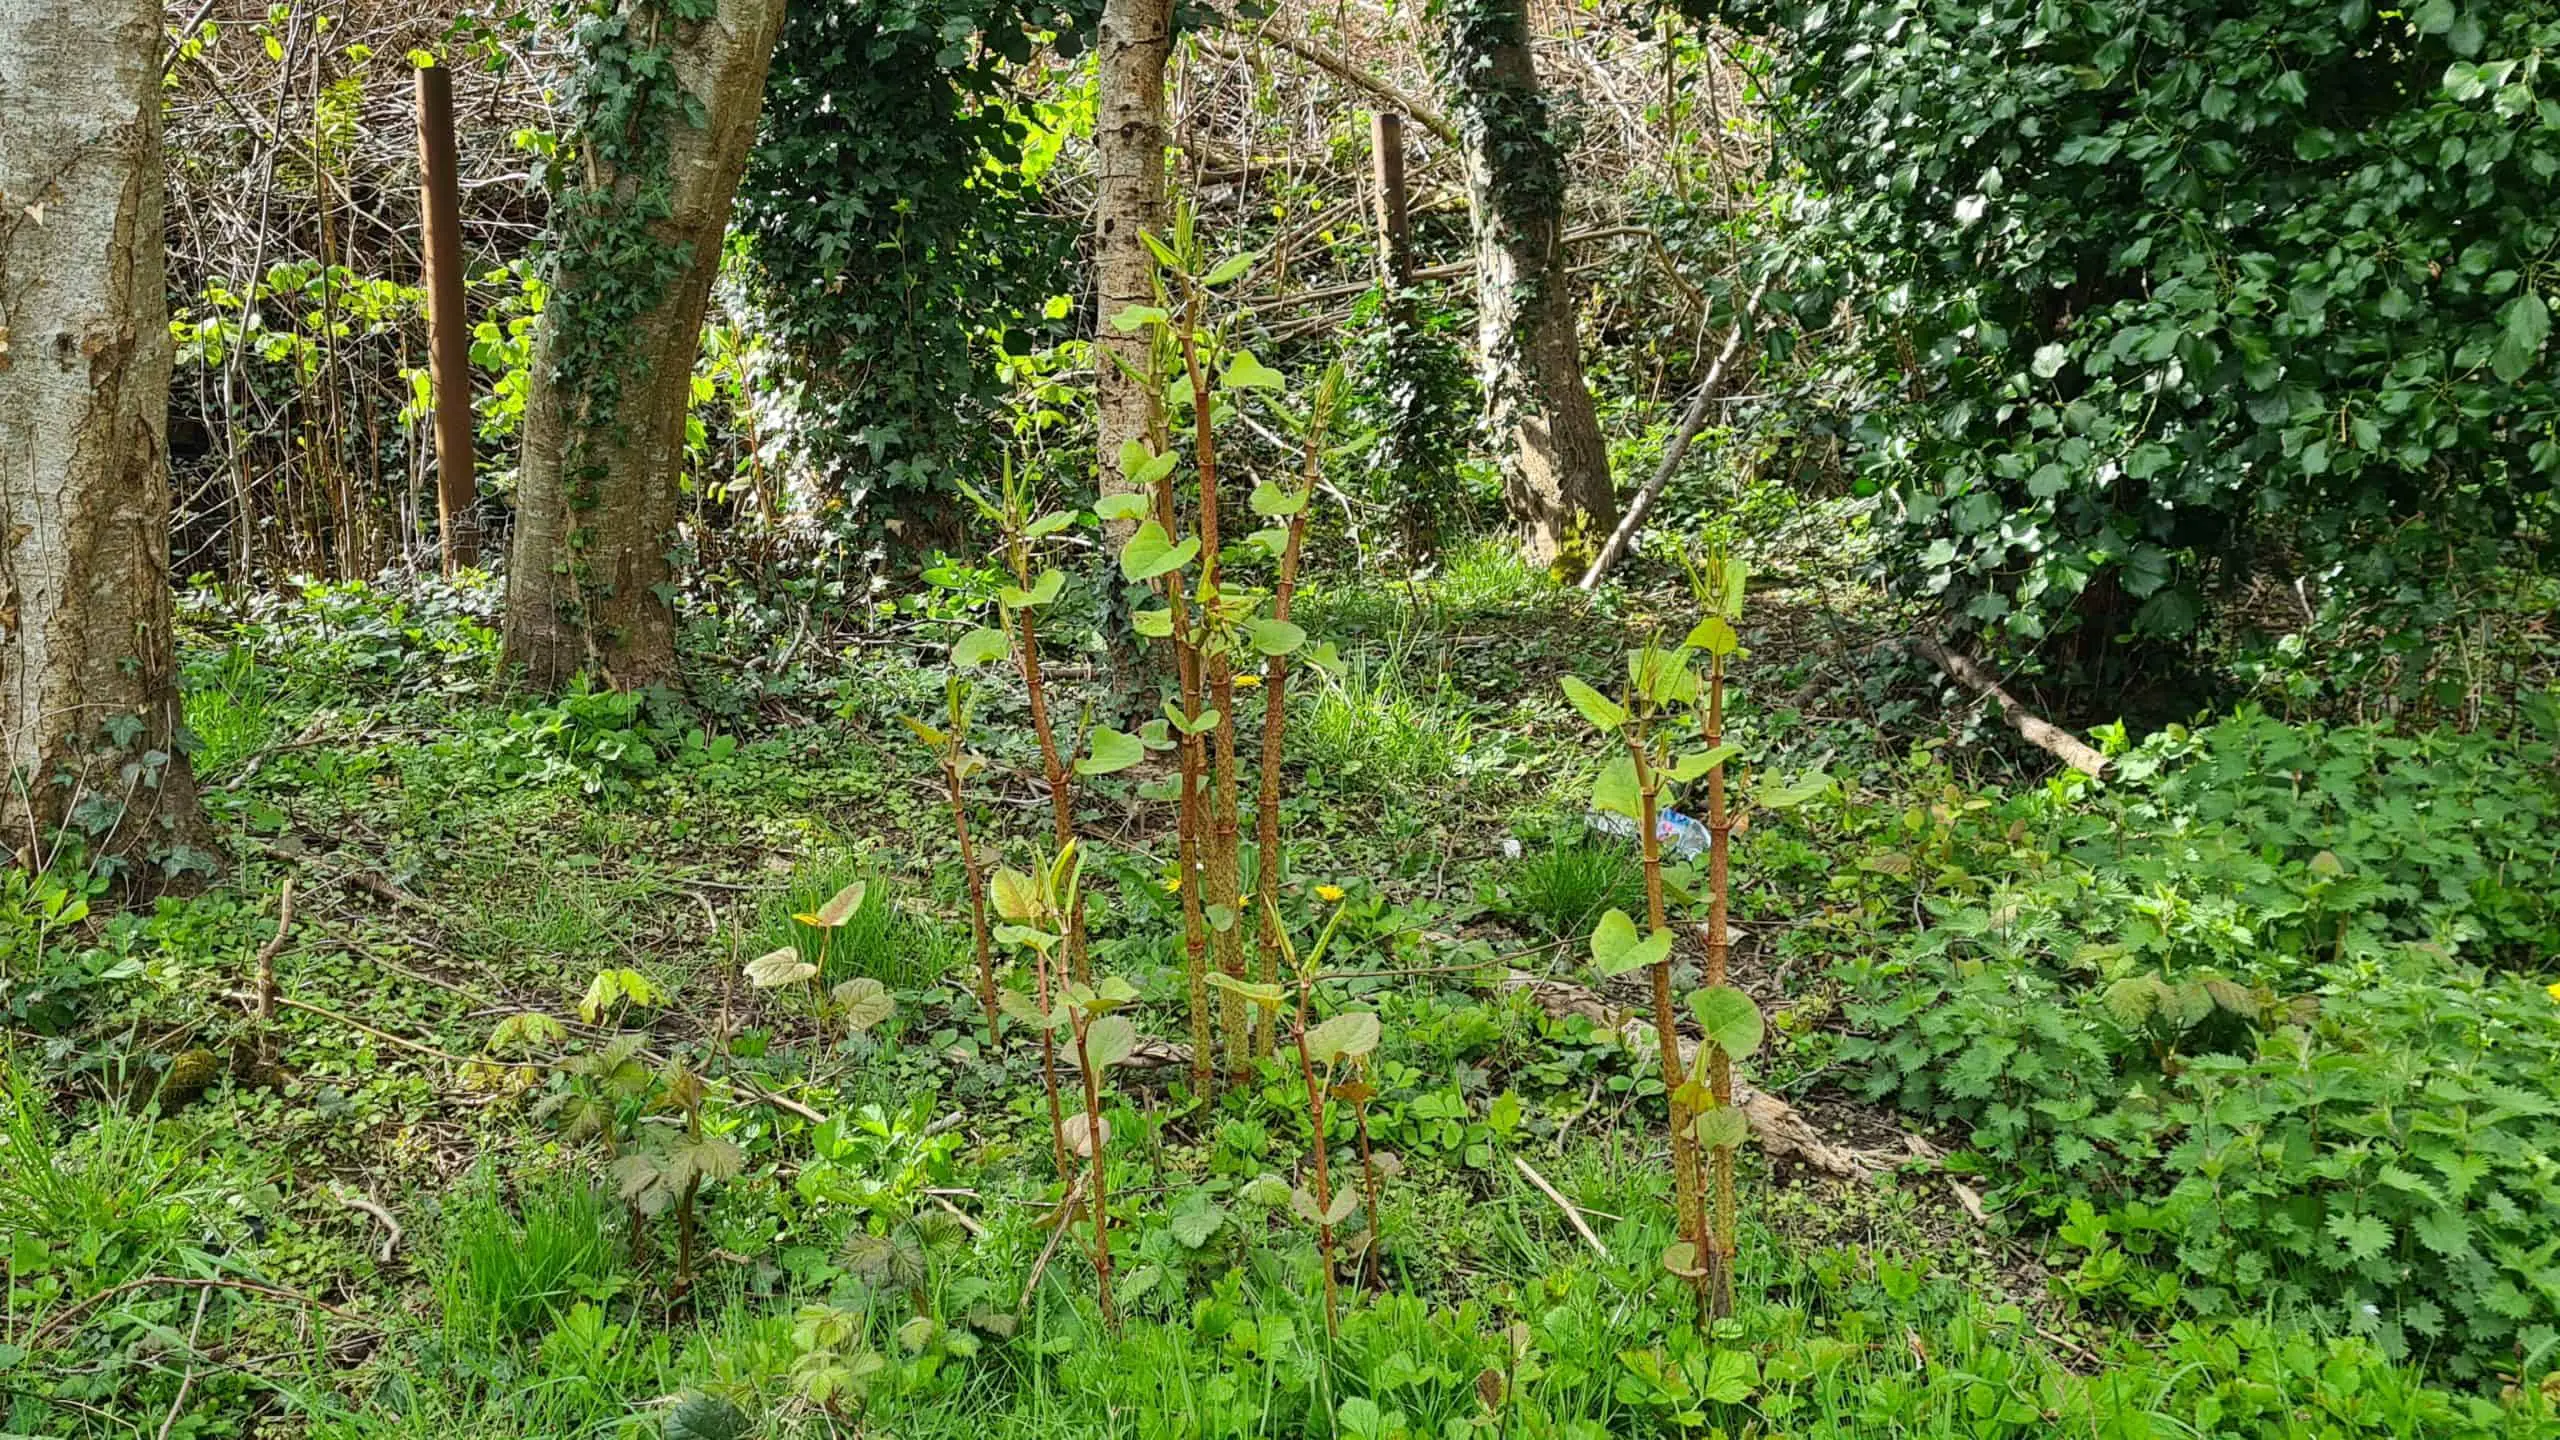 Understanding the relationship between Japanese Knotweed and the law